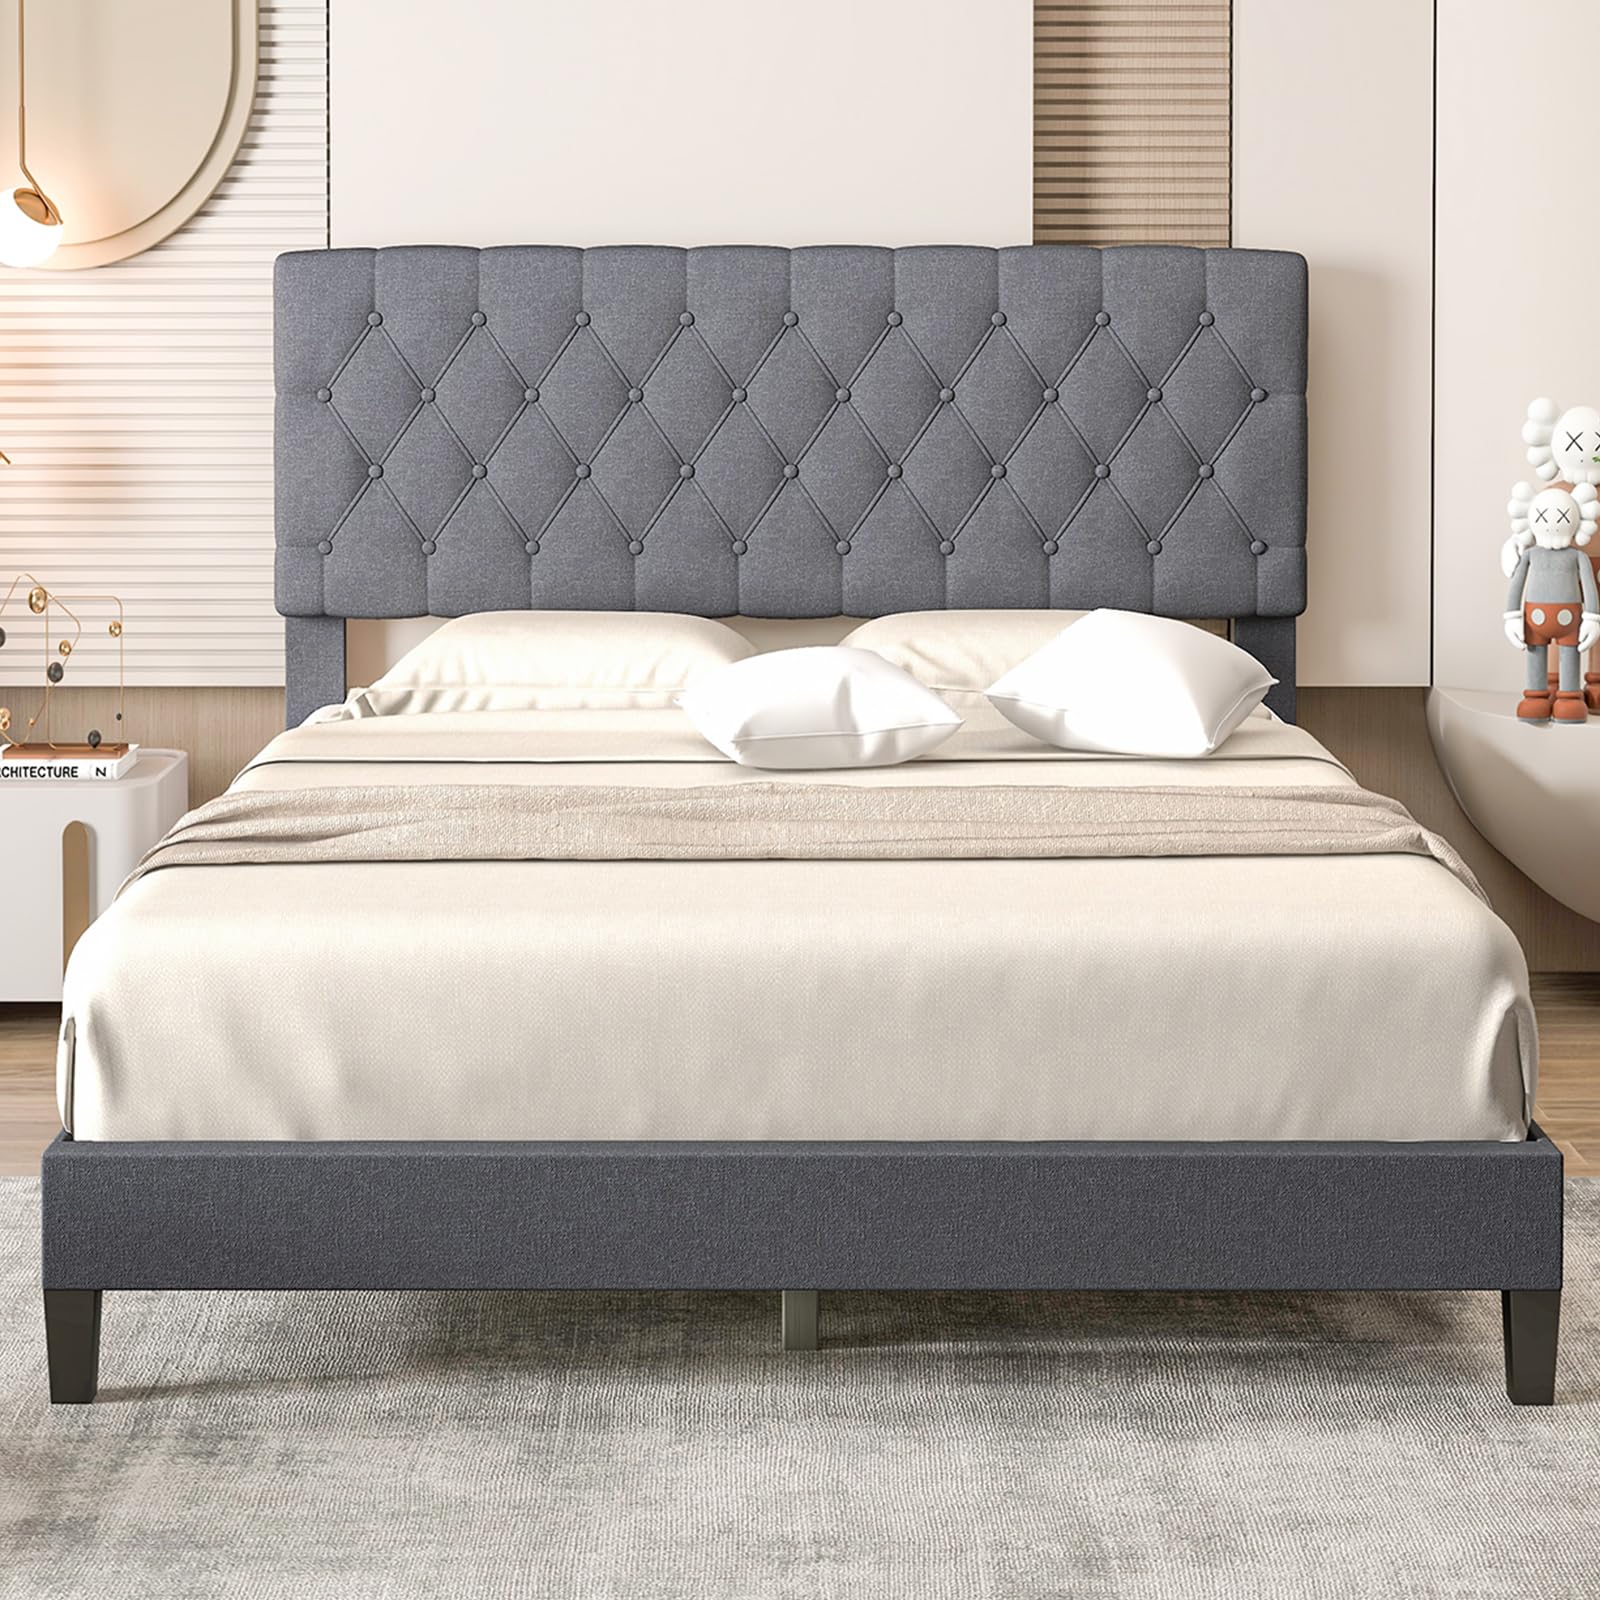 Giantex Queen Bed Frame, Upholstered Platform Bed with Button Tufted Headboard and Solid Wooden Slats Support